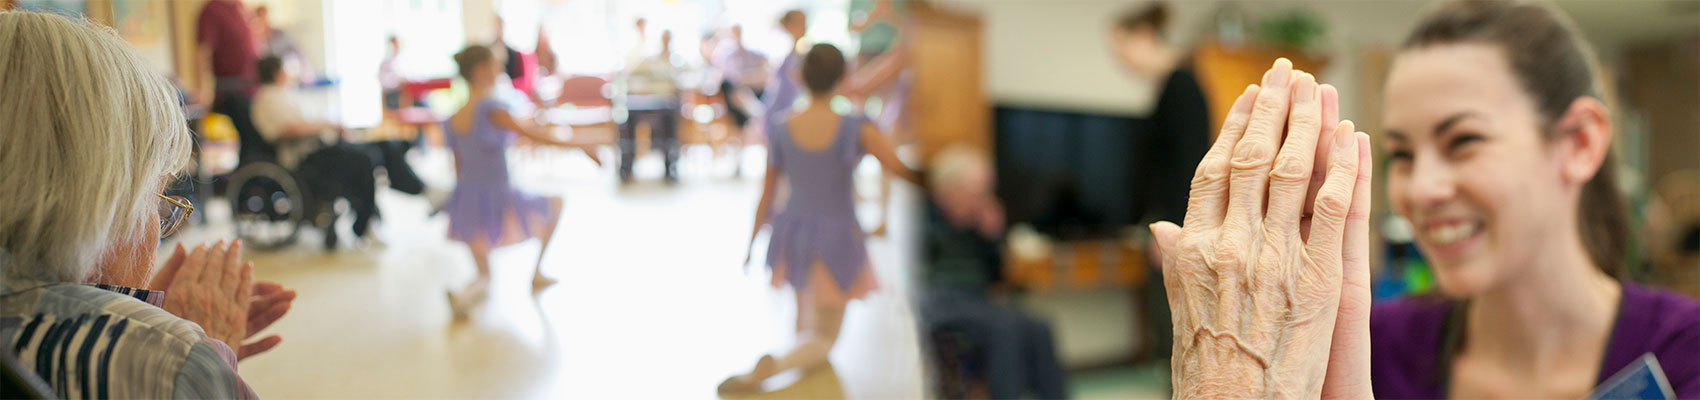 Nurse interacting with a senior in a residential care home and seniors watching kids ballet dancing.